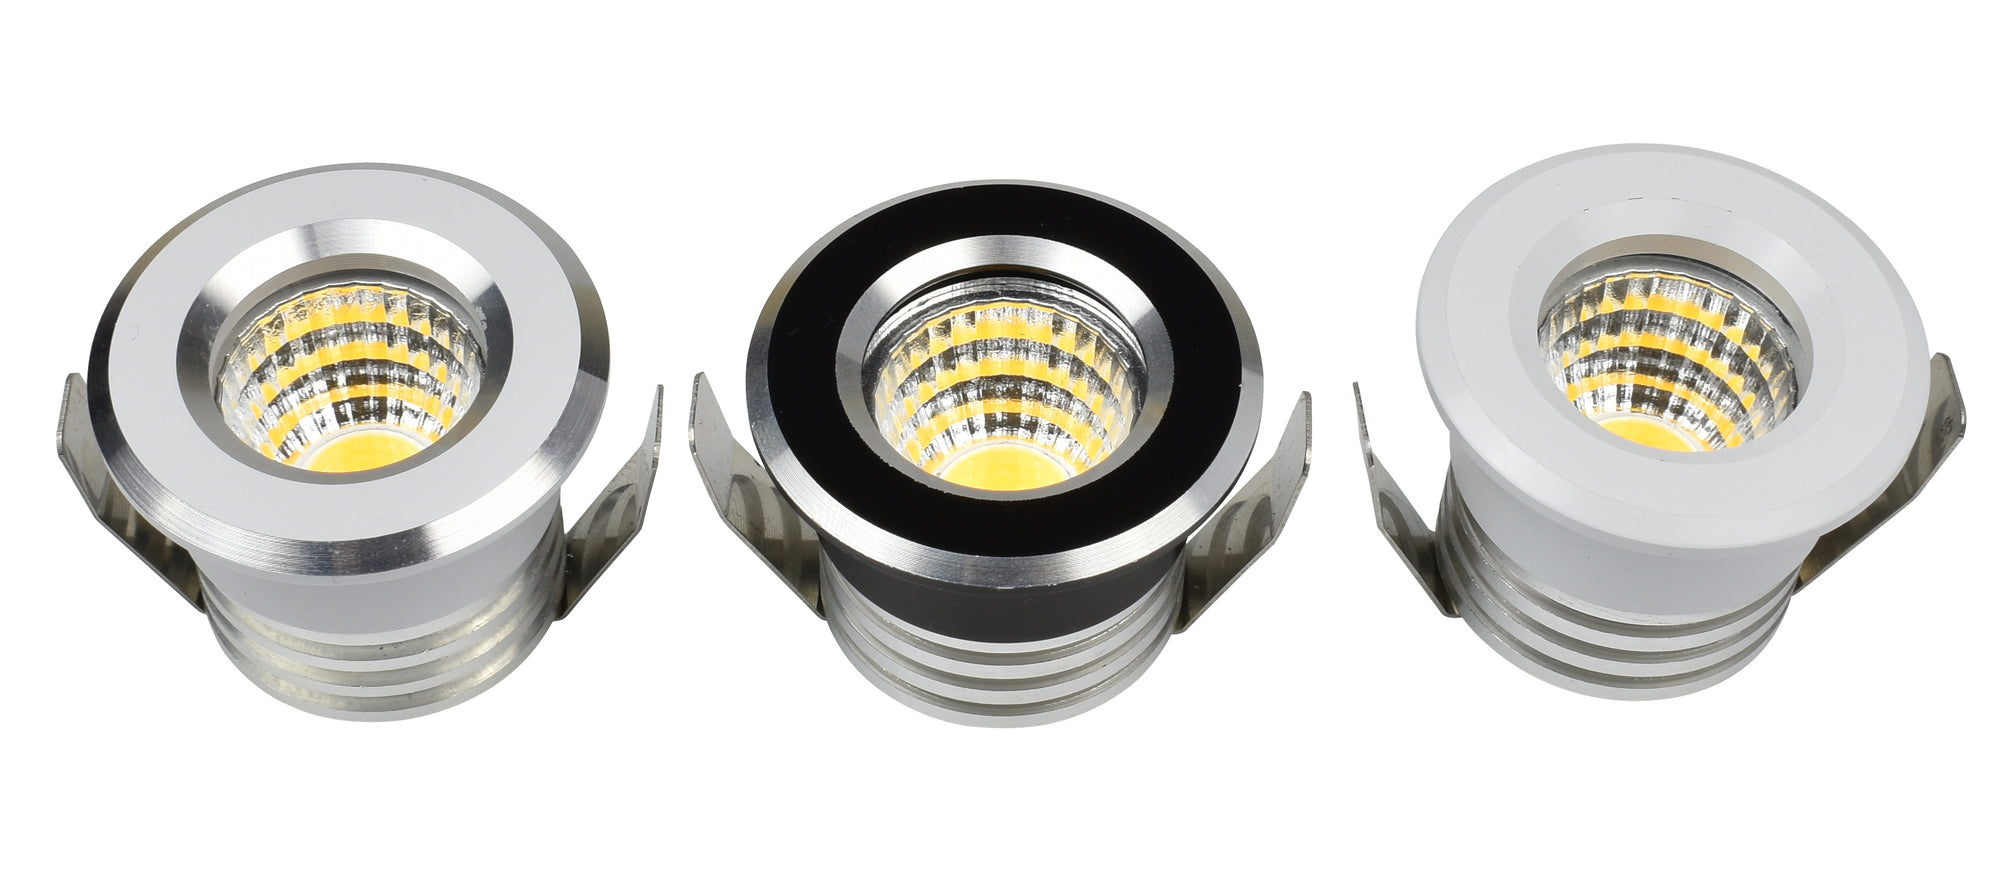 High Quality Mini LED Spotlight Downlights COB 3W Led Spots 220v Dimmable Light for Ceiling Cabinet Showcase Loft Decorations